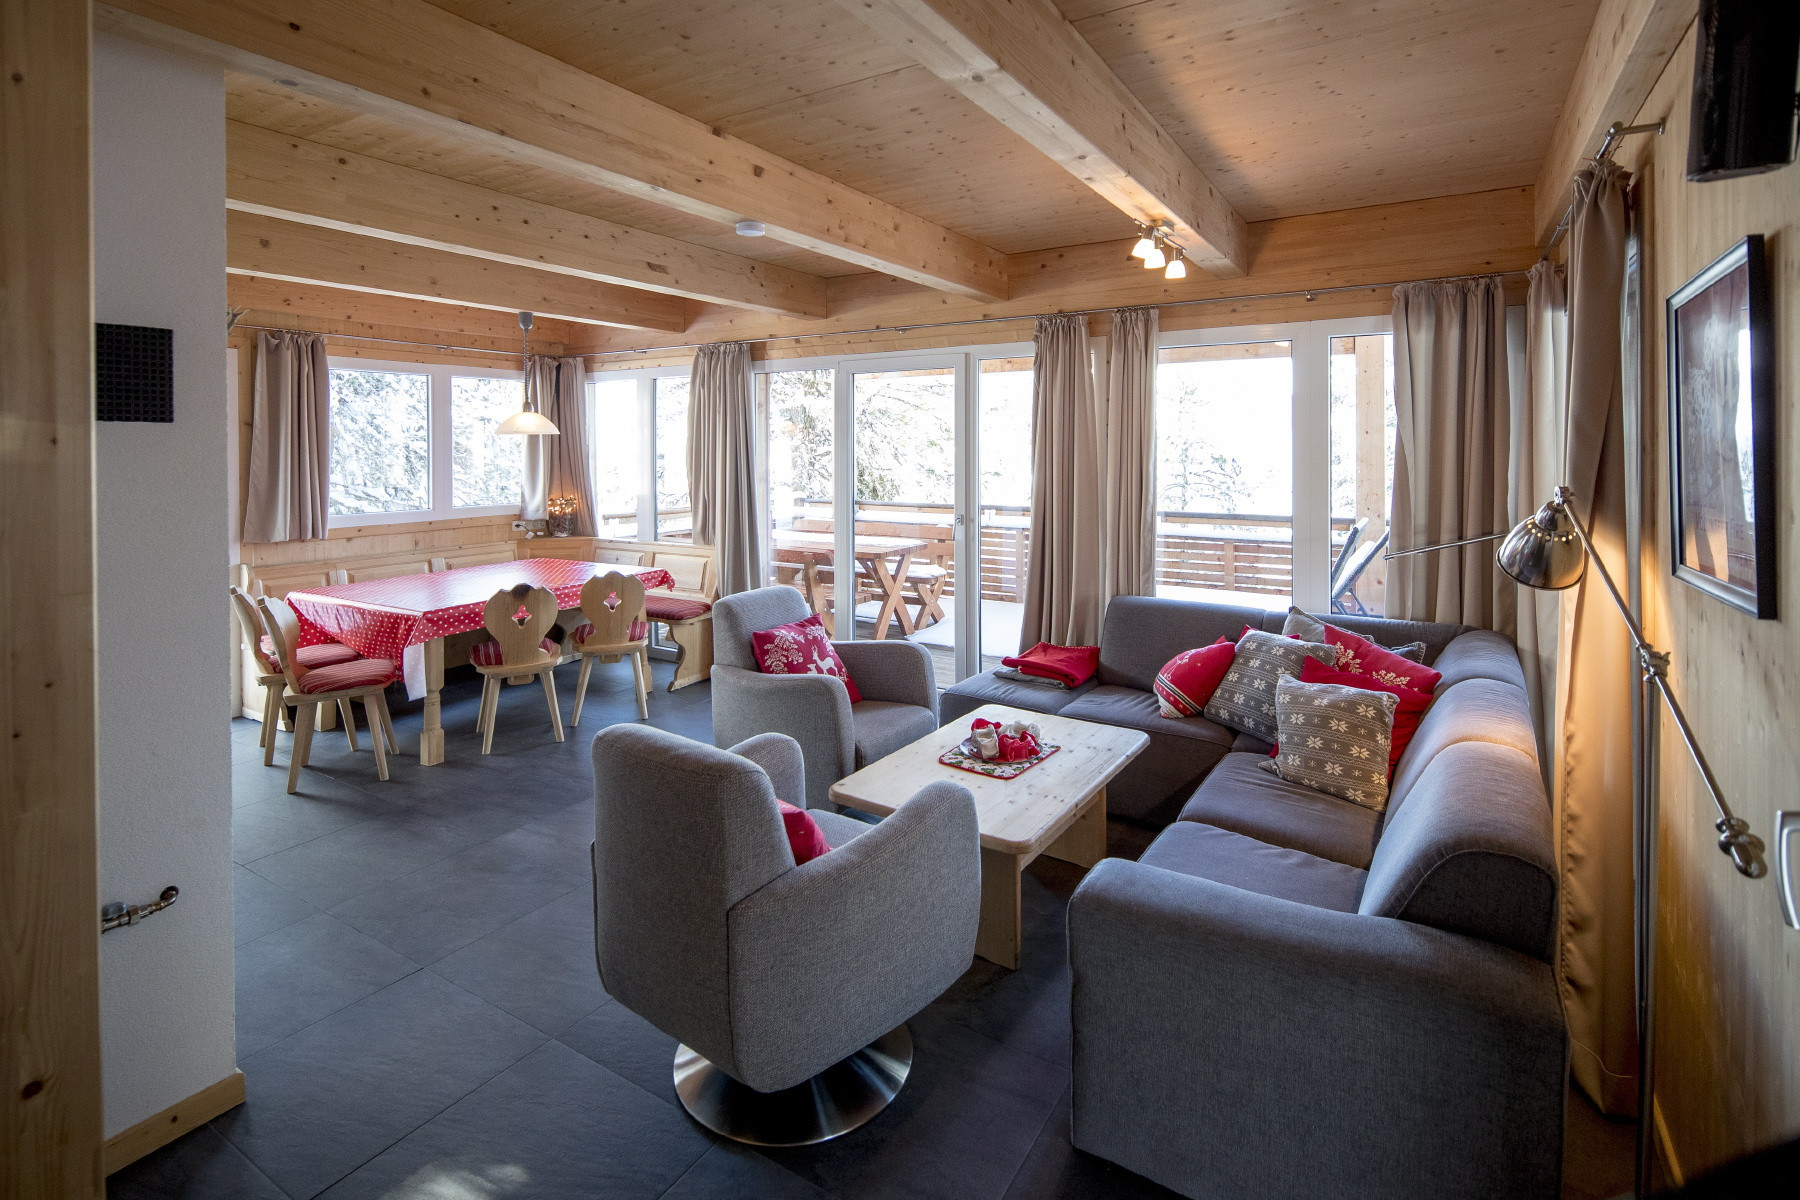  in Turrach - Chalet #30 with IR-sauna and indoor whirlpool